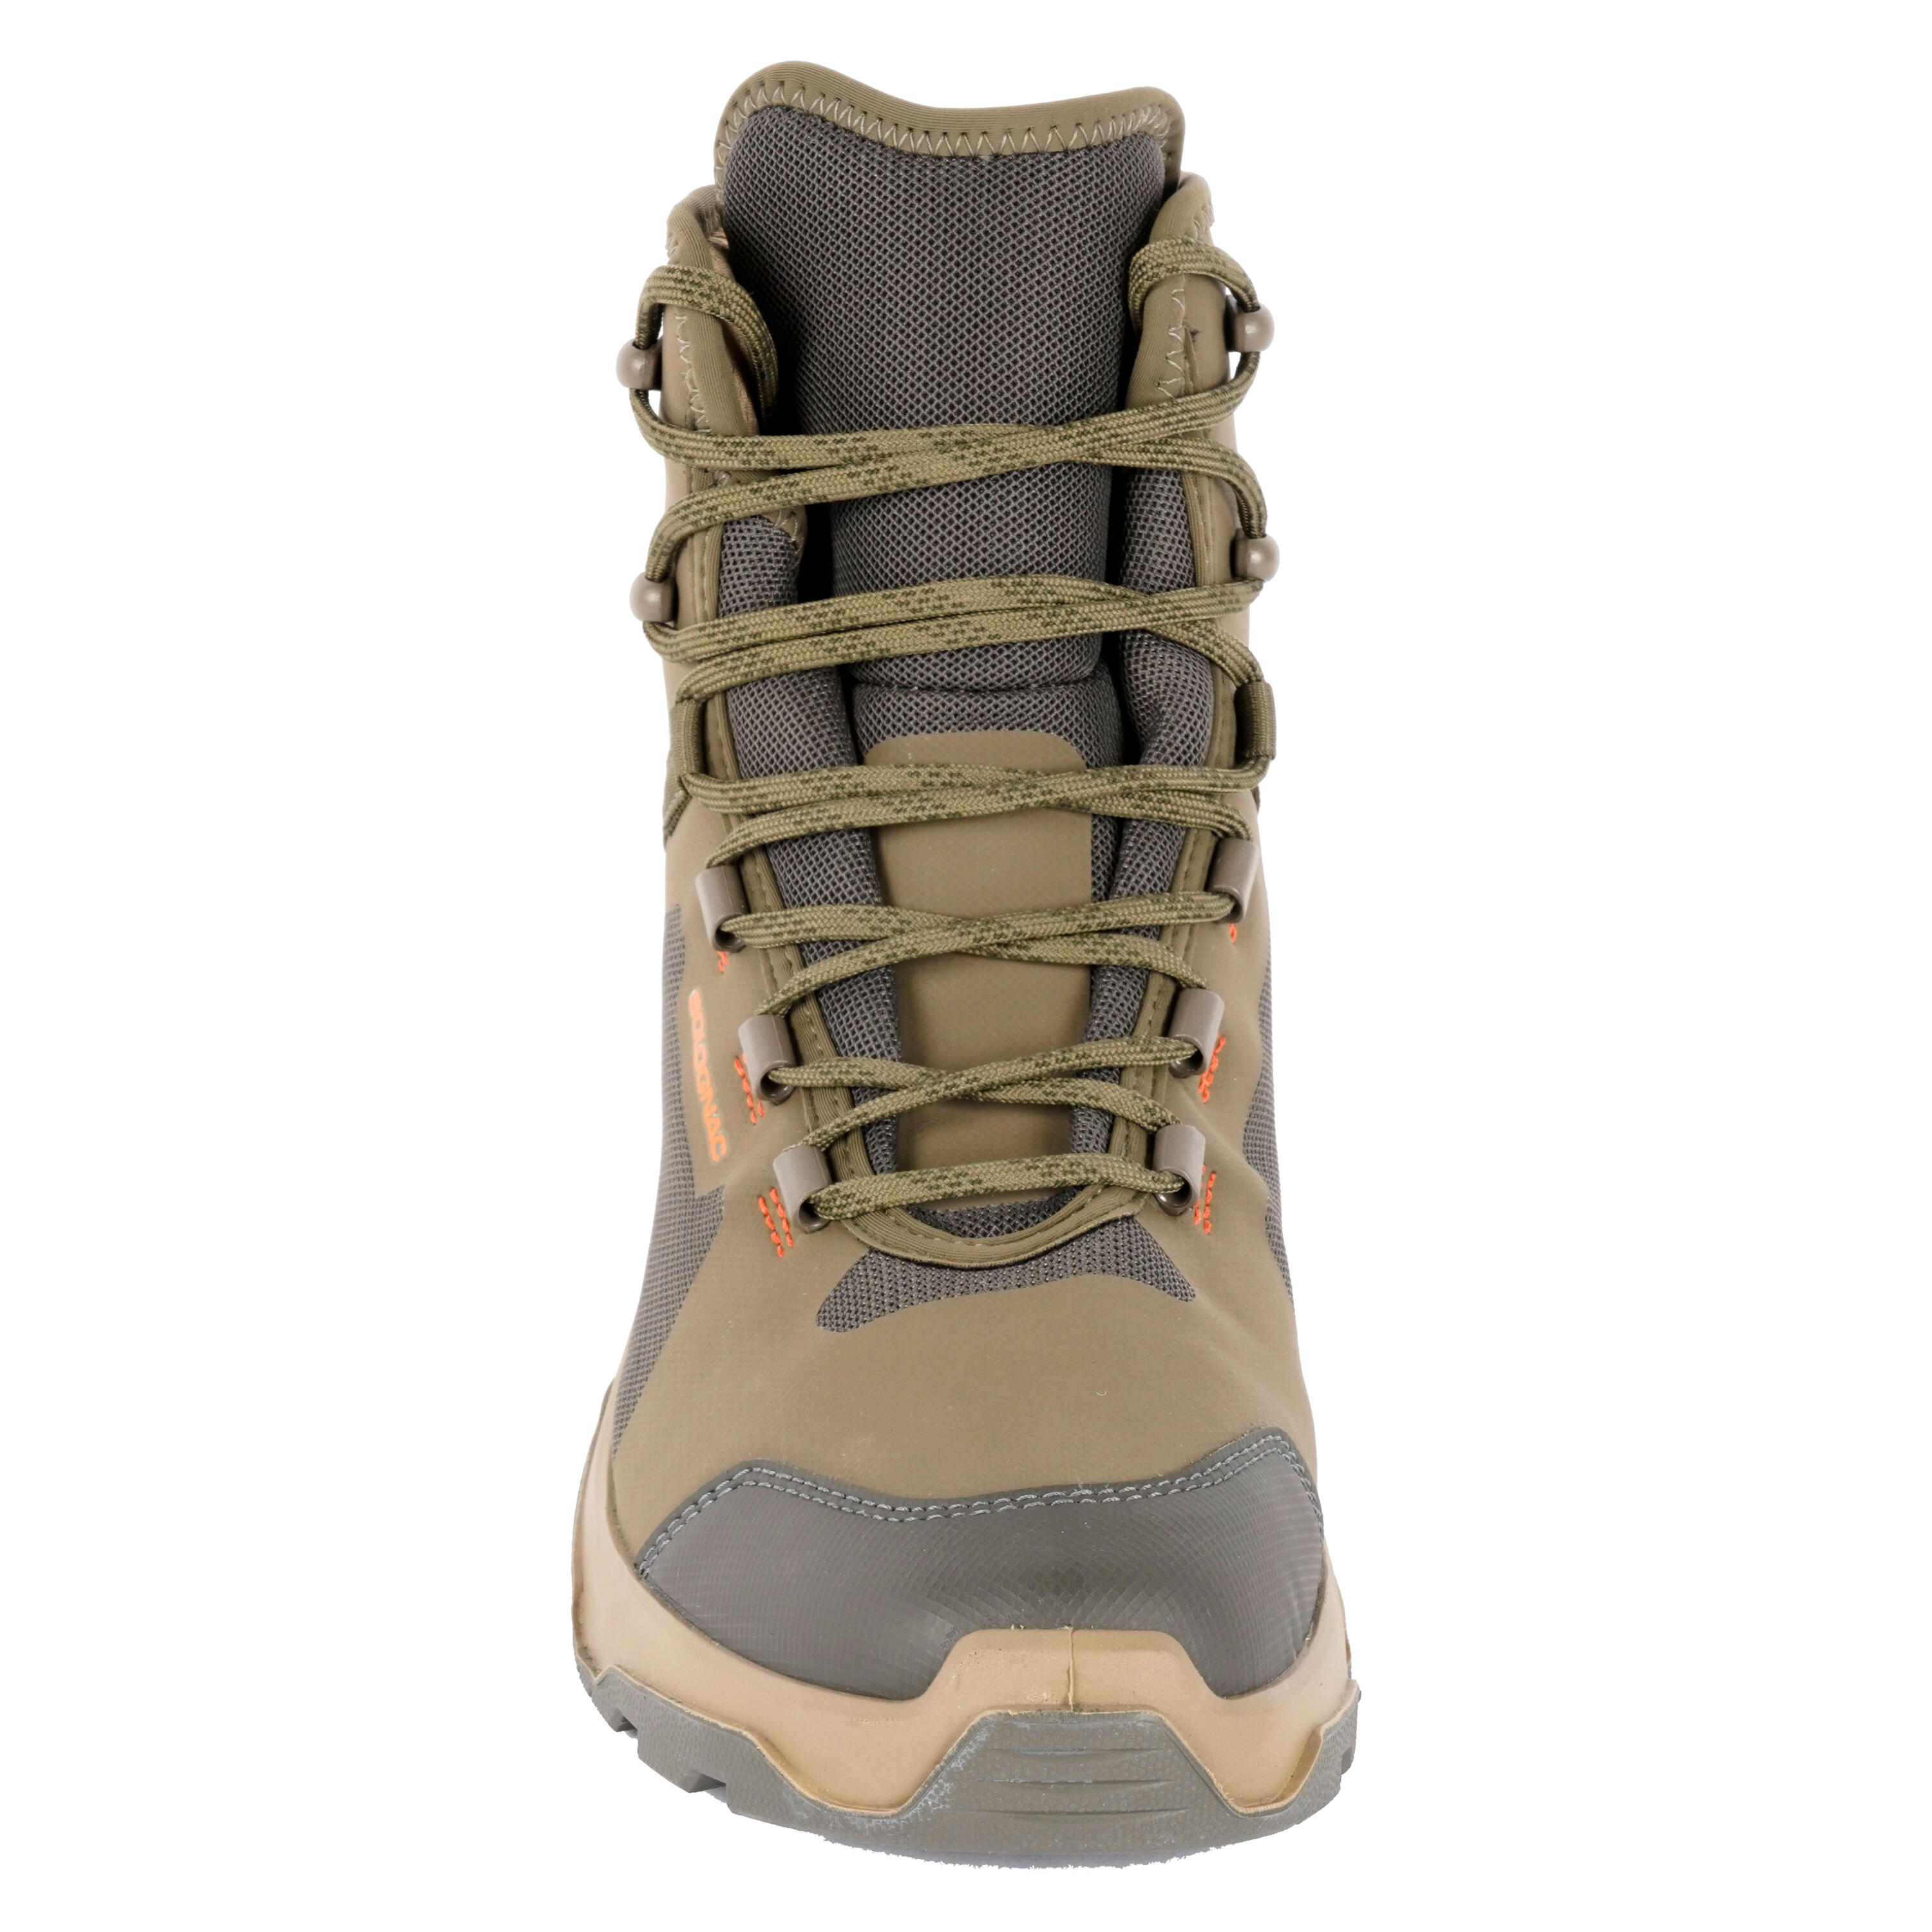 Silent Breathable Boots - Brown 2/9